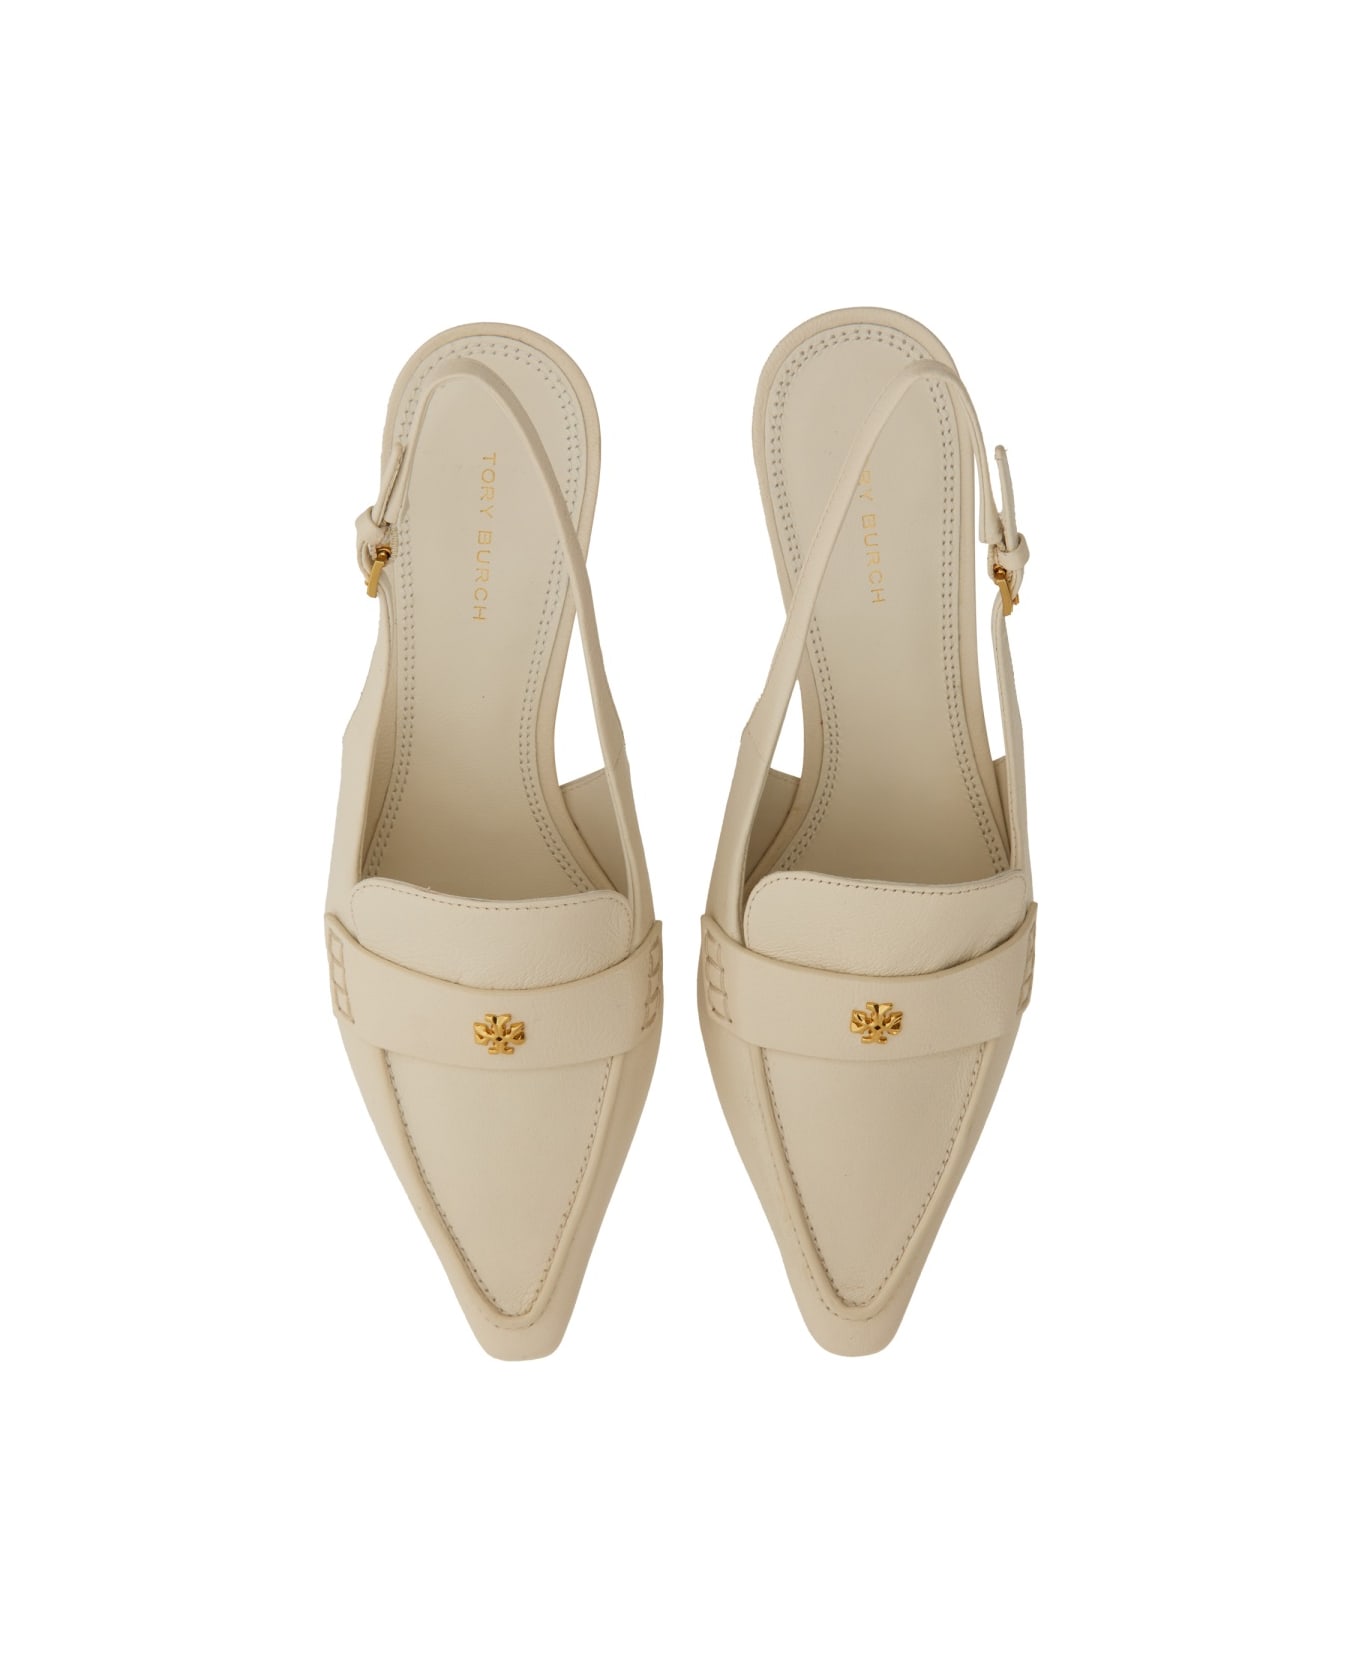 Tory Burch Leather Sandal - IVORY